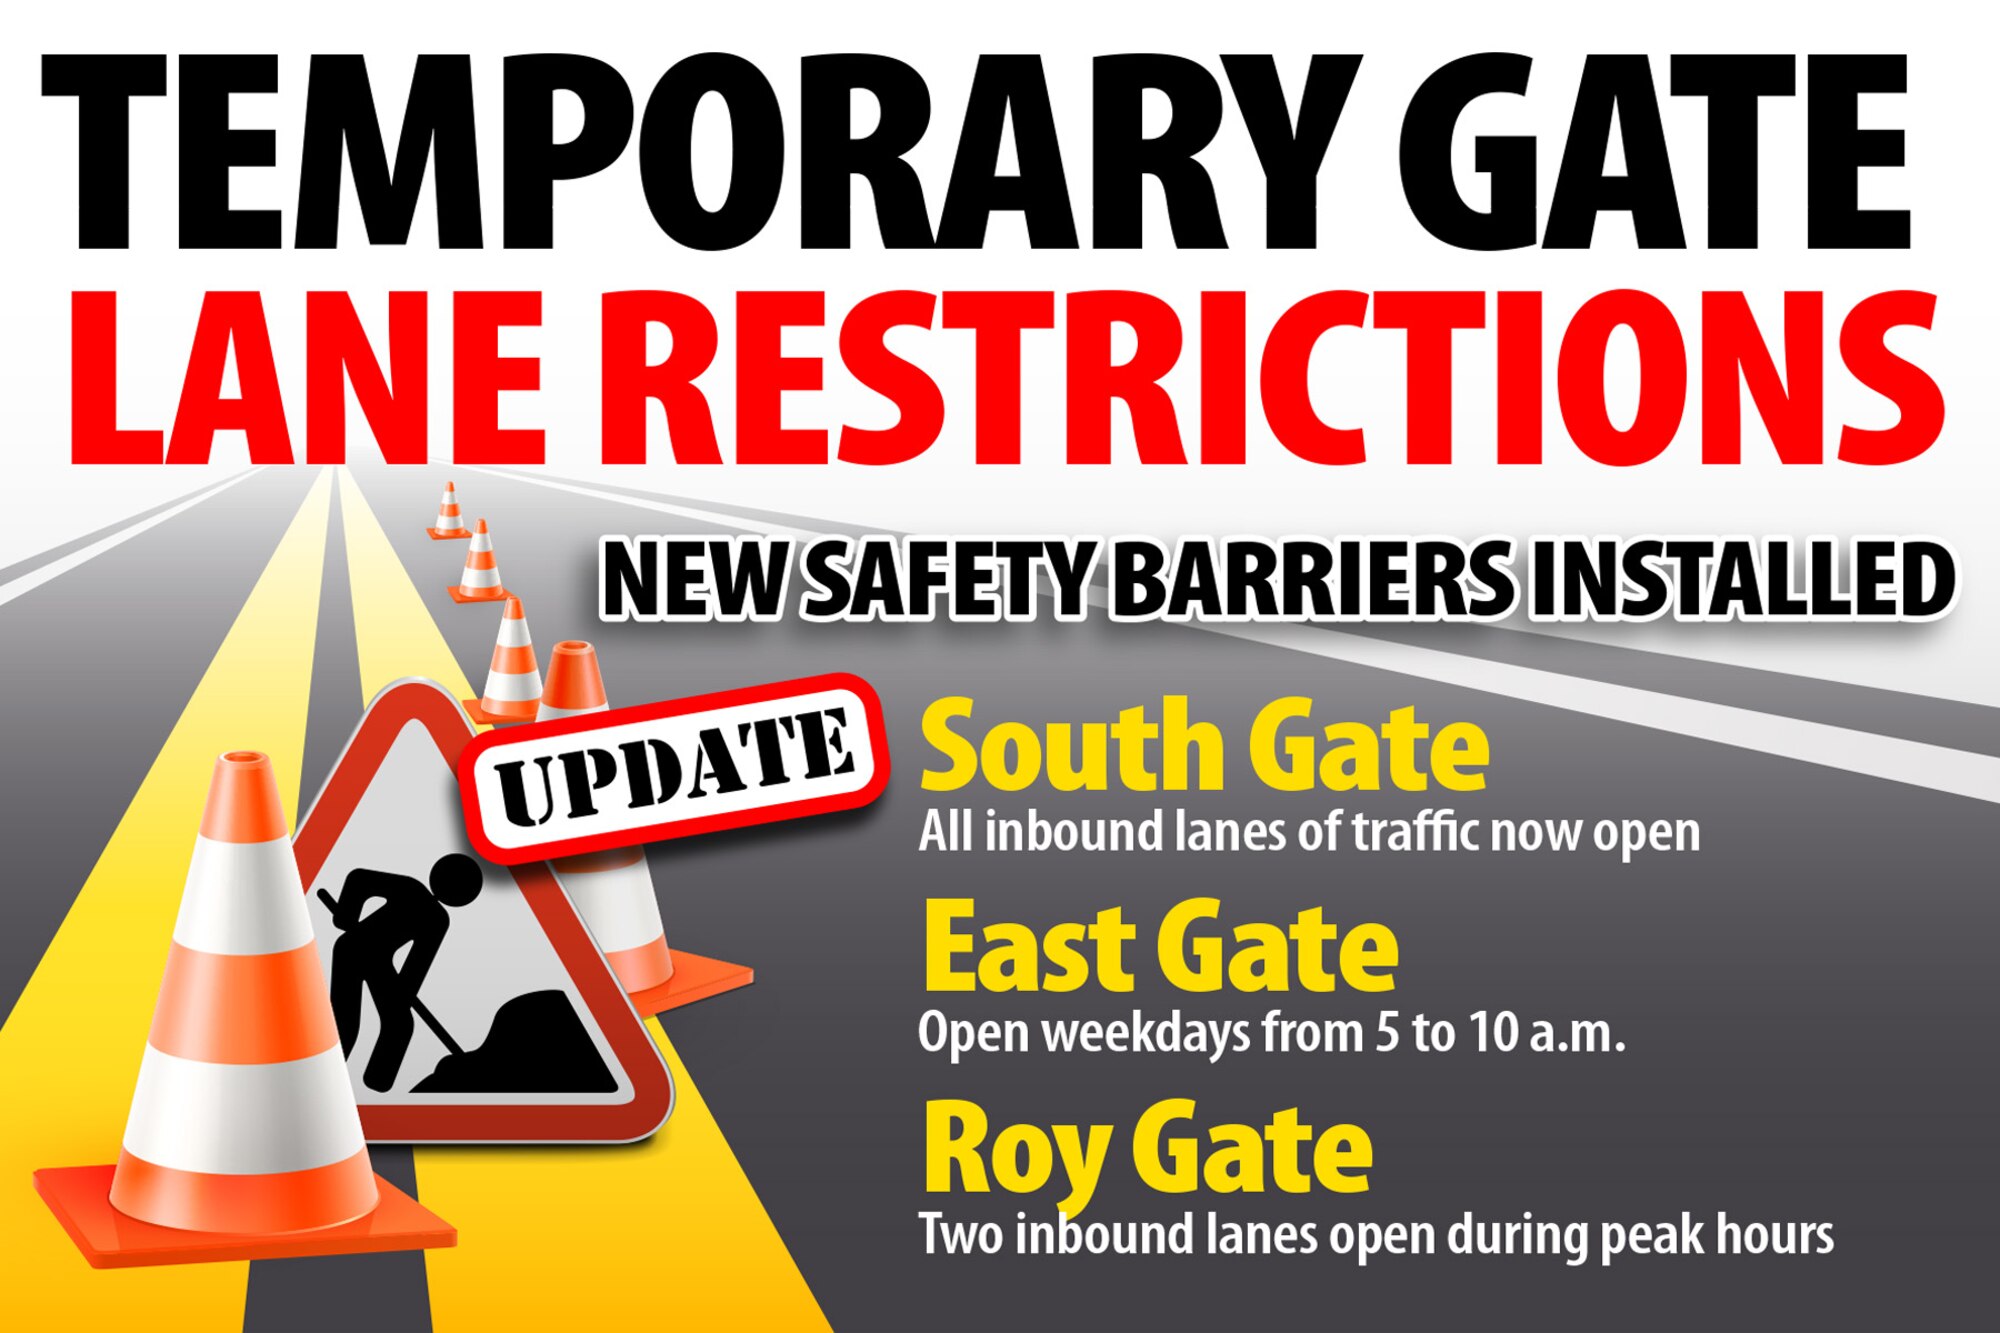 Gate construction has shifted to the Roy Gate, where there will be two inbound lanes of traffic from 5 to 10 a.m. and just one inbound lane of traffic opened all other times. Those leaving the gate during peak hours will be diverted through the Museum Gate. The East Gate will be open weekdays from 5 to 10 a.m. during the construction period.